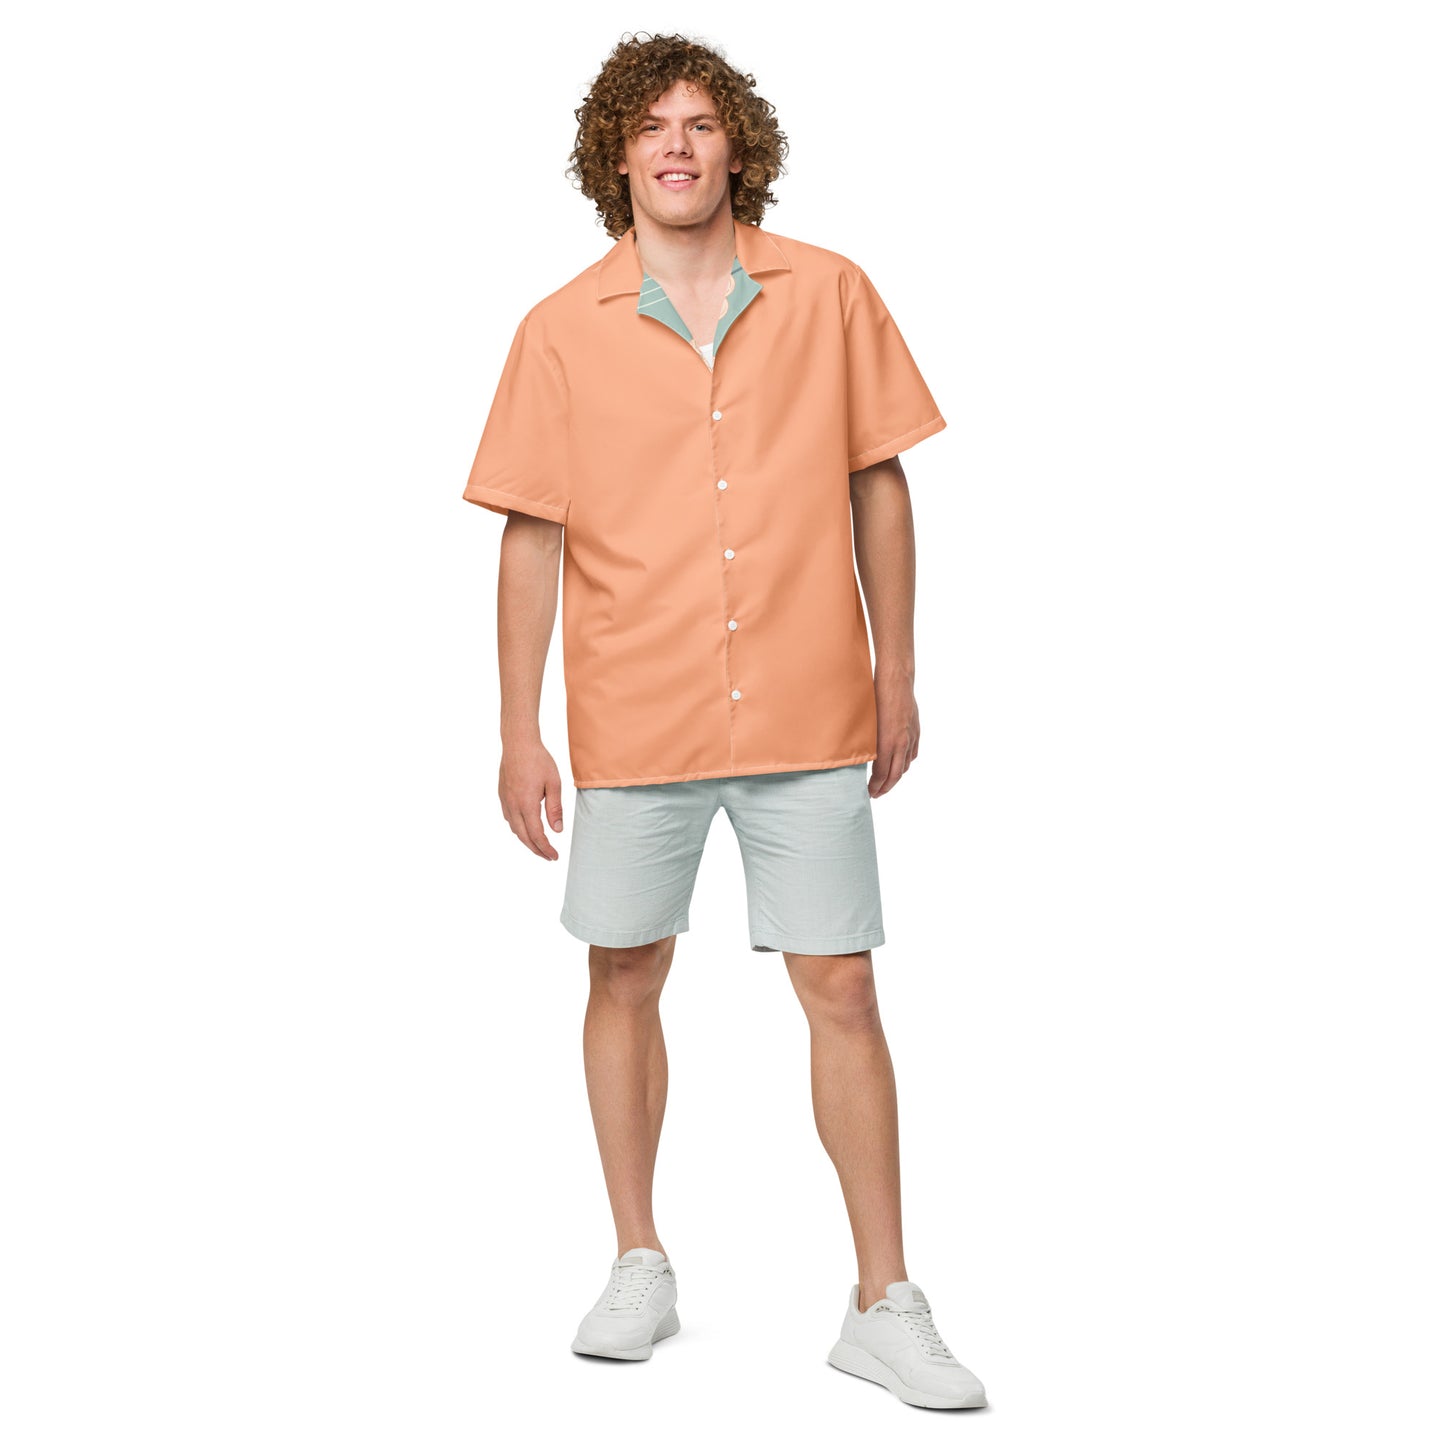 Meet your new favorite Men’s Women’s Button Sun protection Shirt for Hiking; our UPF 50+ short sleeve sun Protection shirt from Appalachian Bittersweet! 